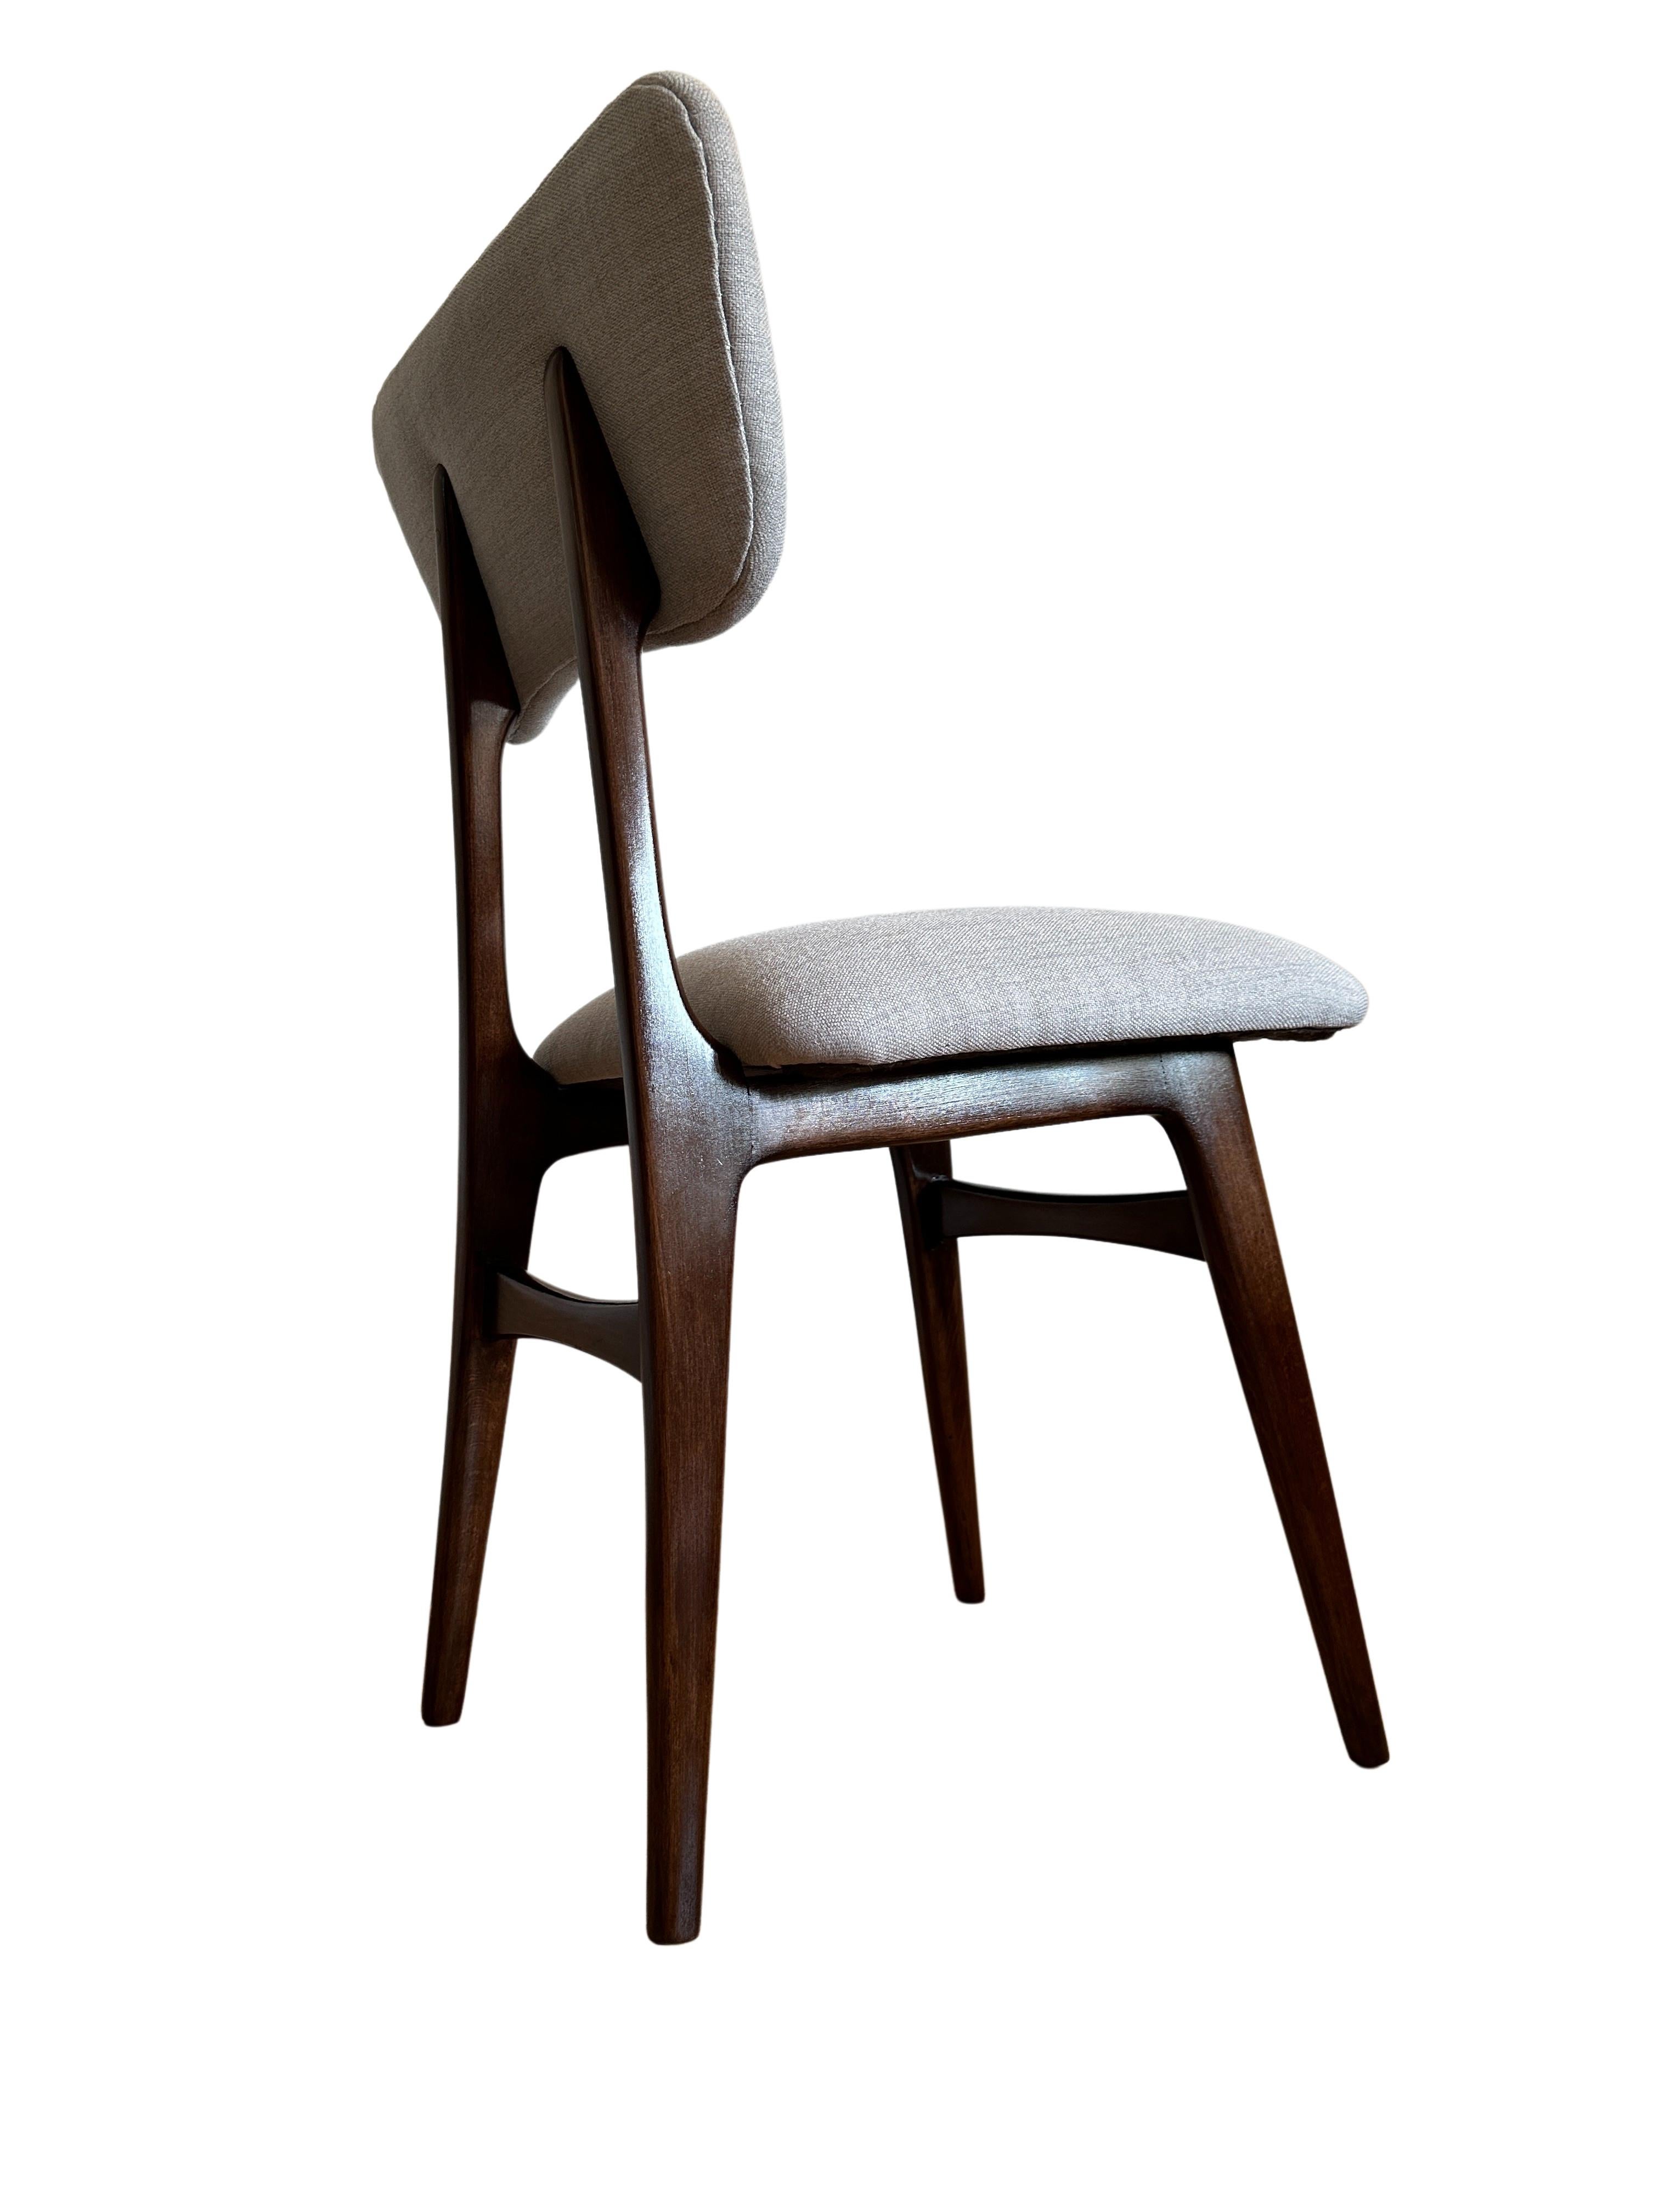 Set of 6 Midcentury Beige and Grey Dining Chairs, Europe, 1960s For Sale 9